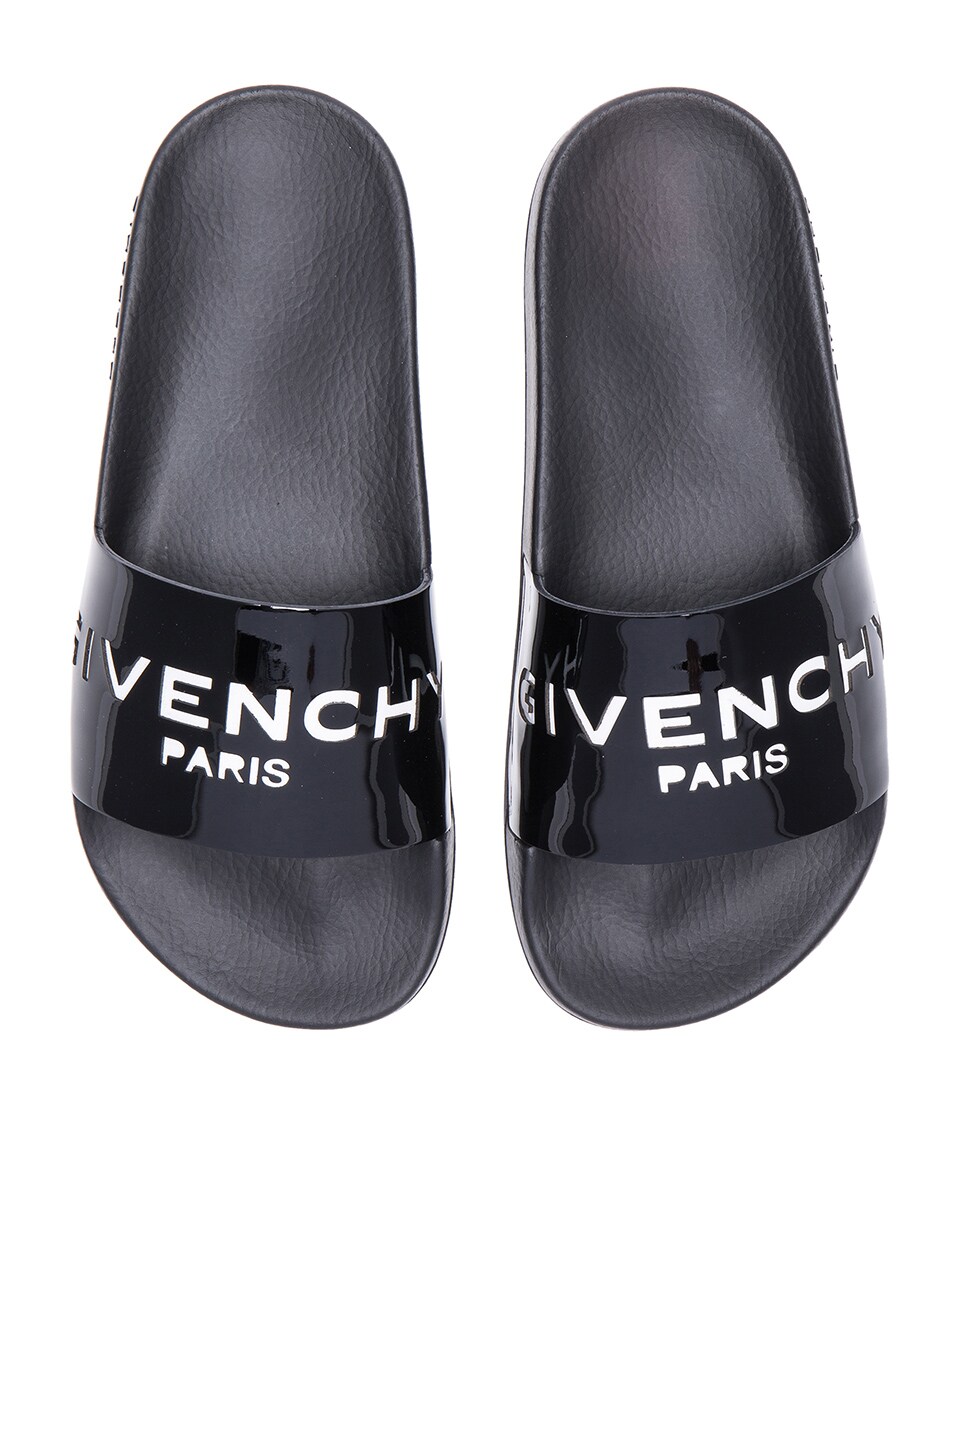 Givenchy Logo Patent Leather Slide Sandals in Black | FWRD